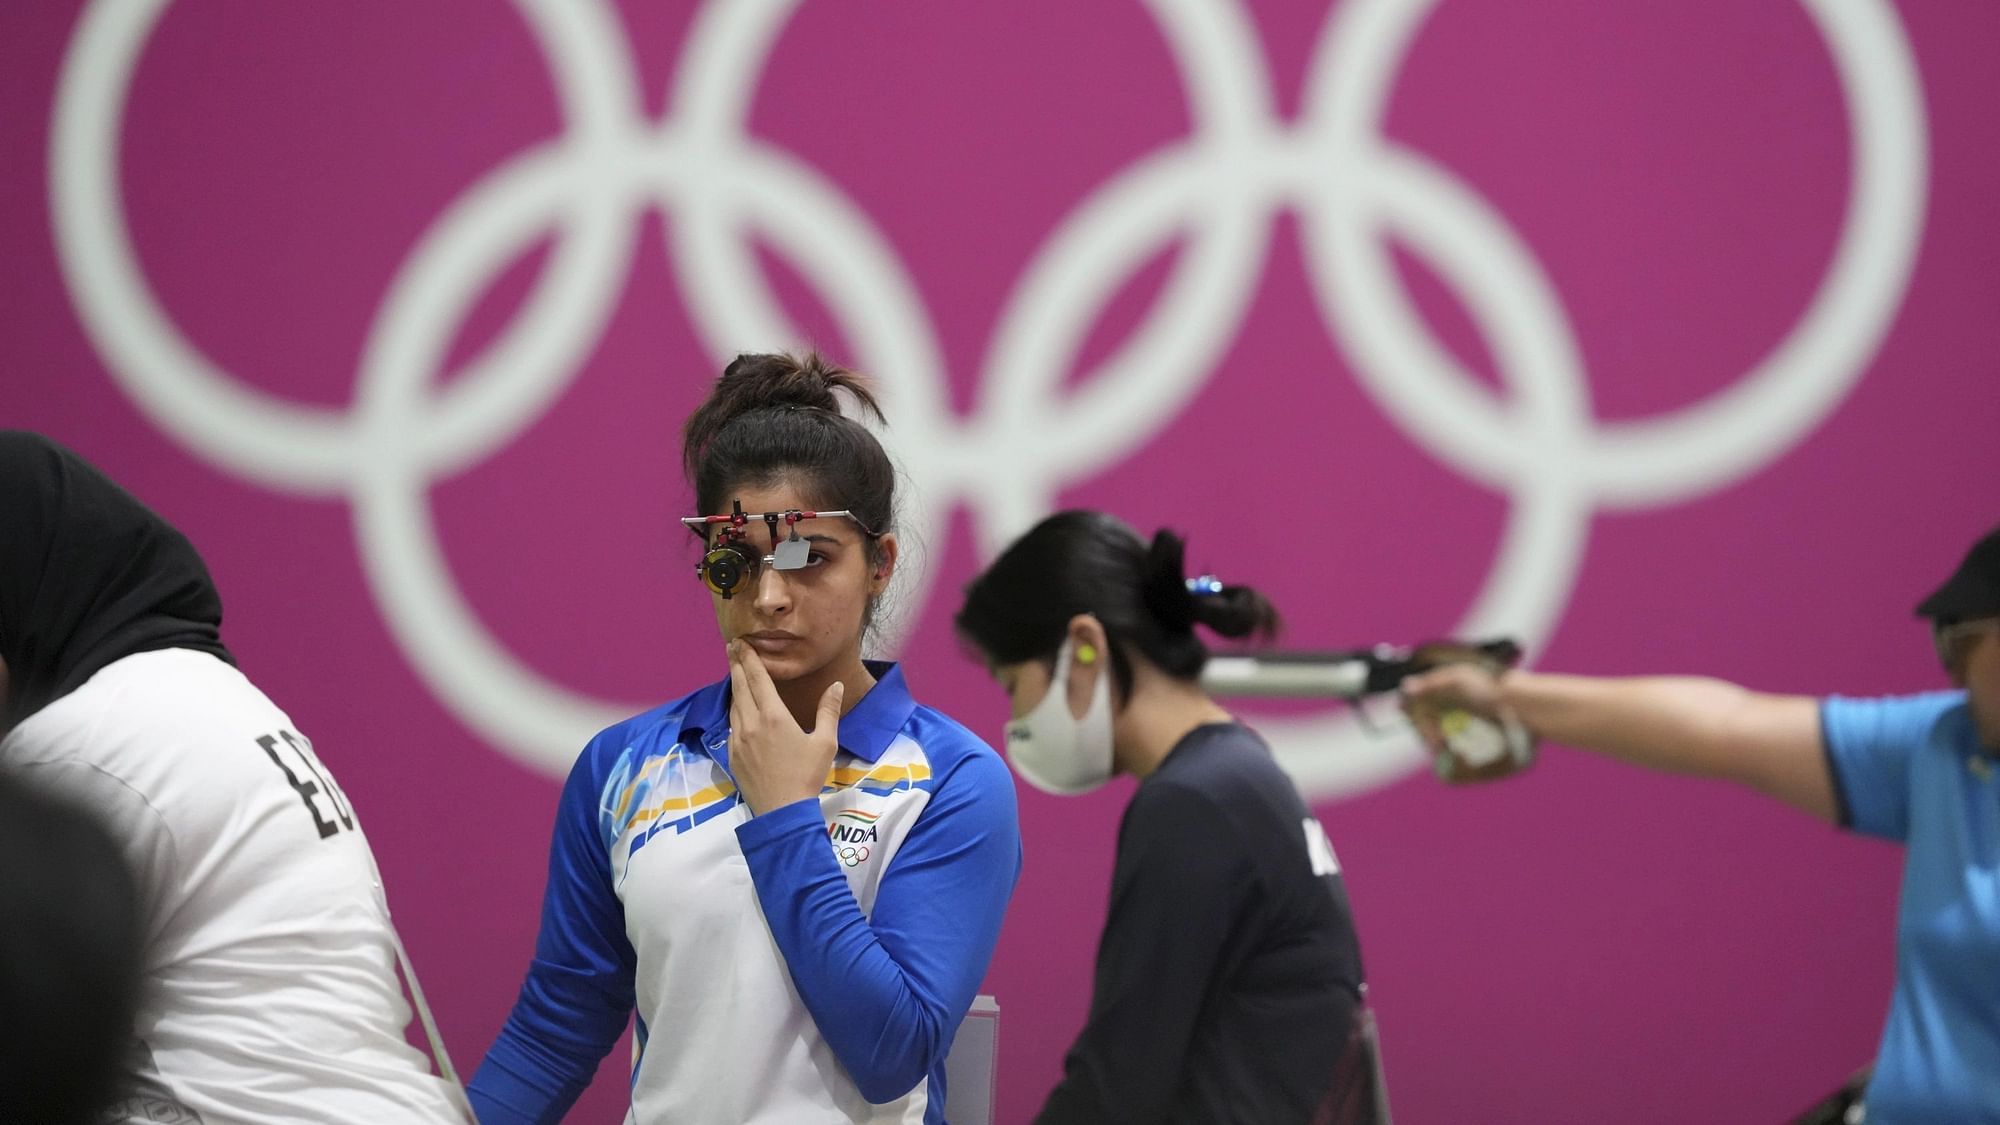 <div class="paragraphs"><p>2020 Tokyo Olympics: Manu Bhaker to compete in 10m air pistol mixed qualifications, India vs Spain in Men's hockey and several other Indian athletes on Day 4 of the Tokyo Olympics.&nbsp;</p></div>